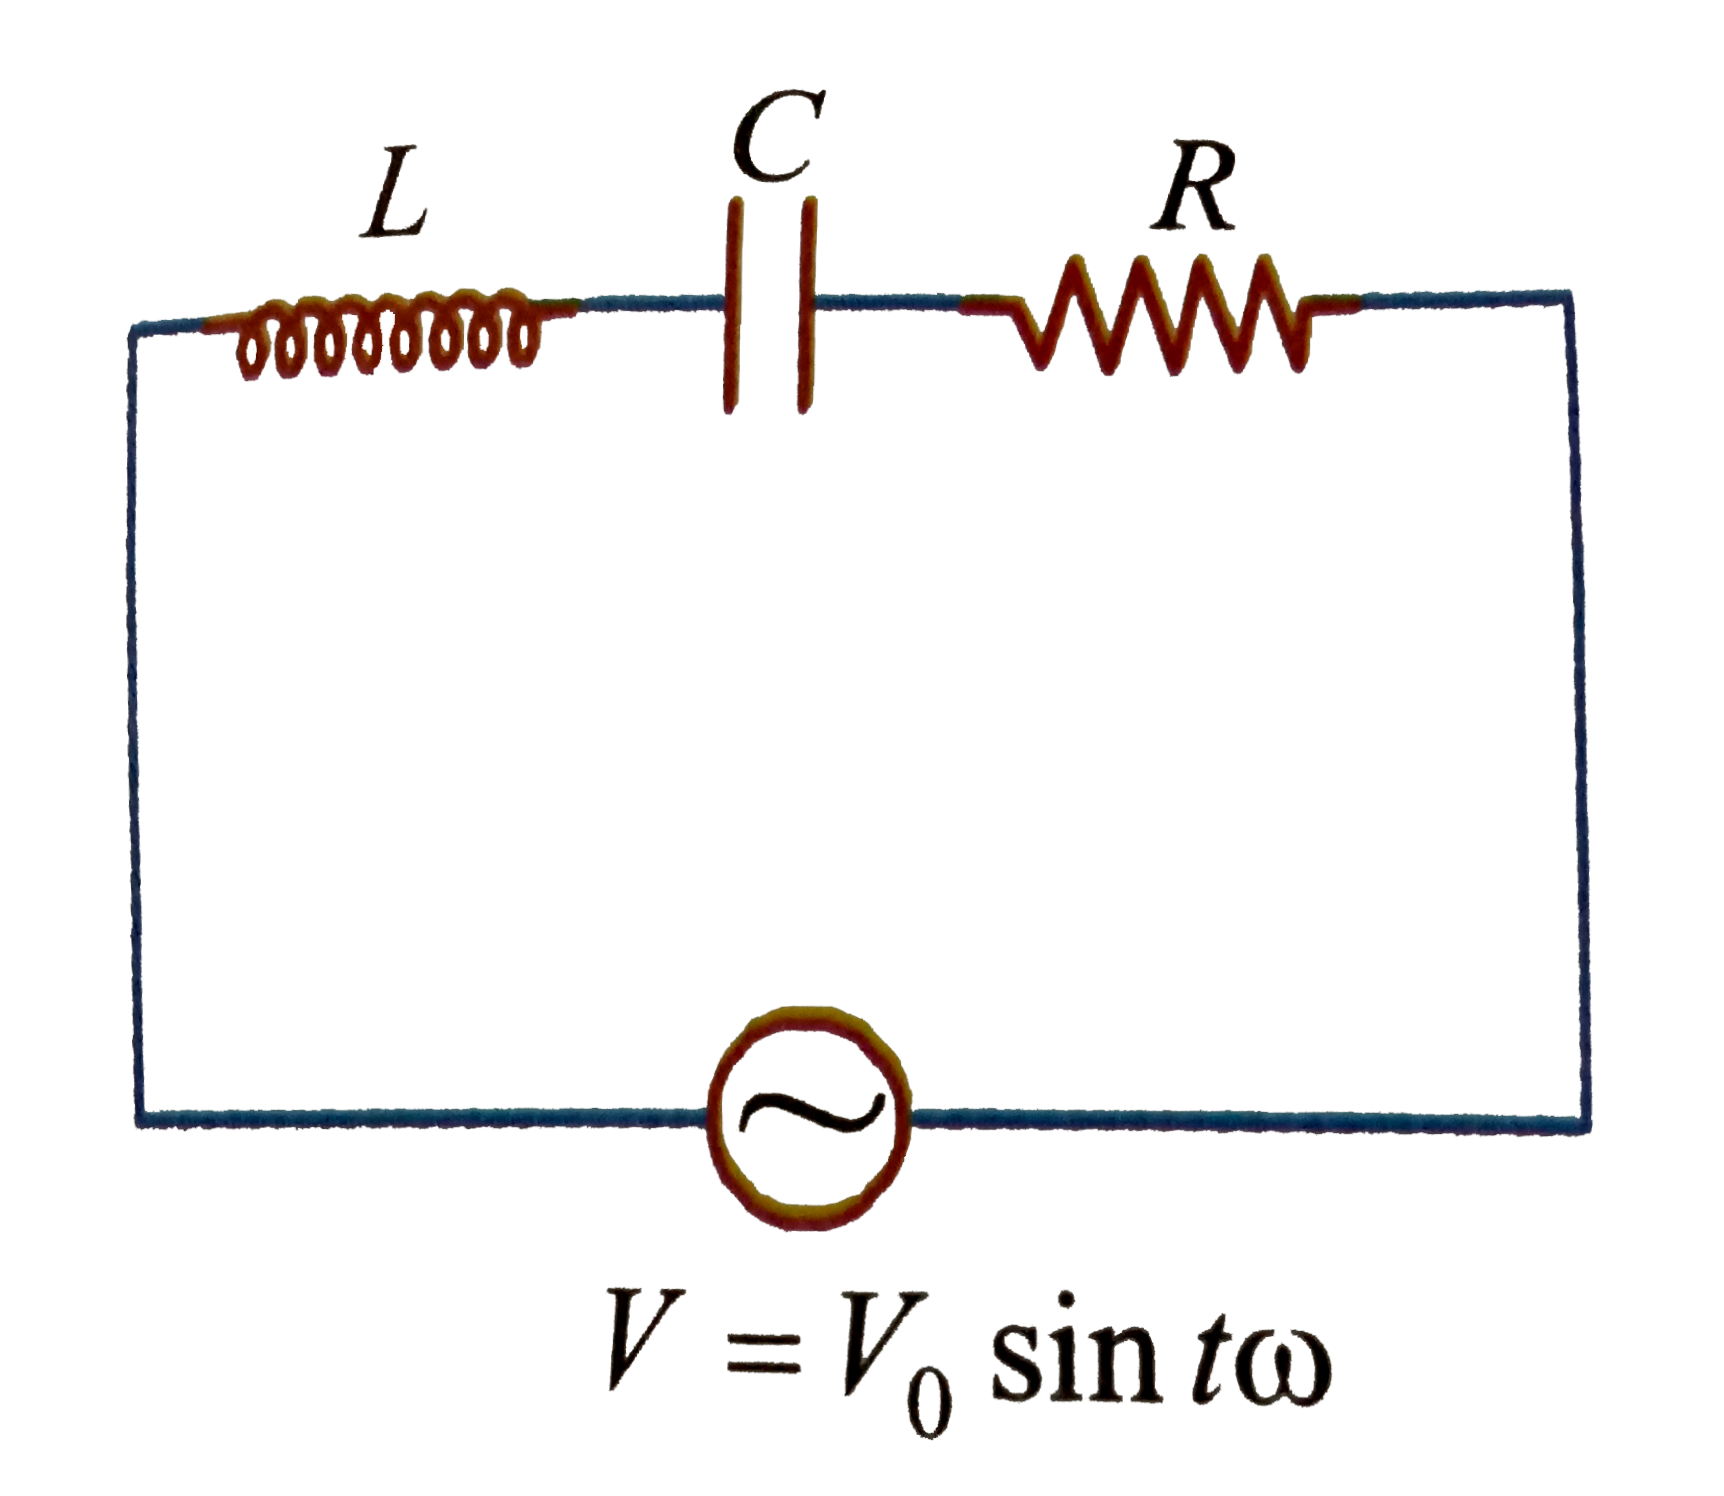 For the LCR circuit, shown here, the current is observed to lead the applied voltage. An additional capacitor C', when joined with the capacitor C present in the circuit, makes the power factor of the circuit unity. The capacitor C' must have been connected in: